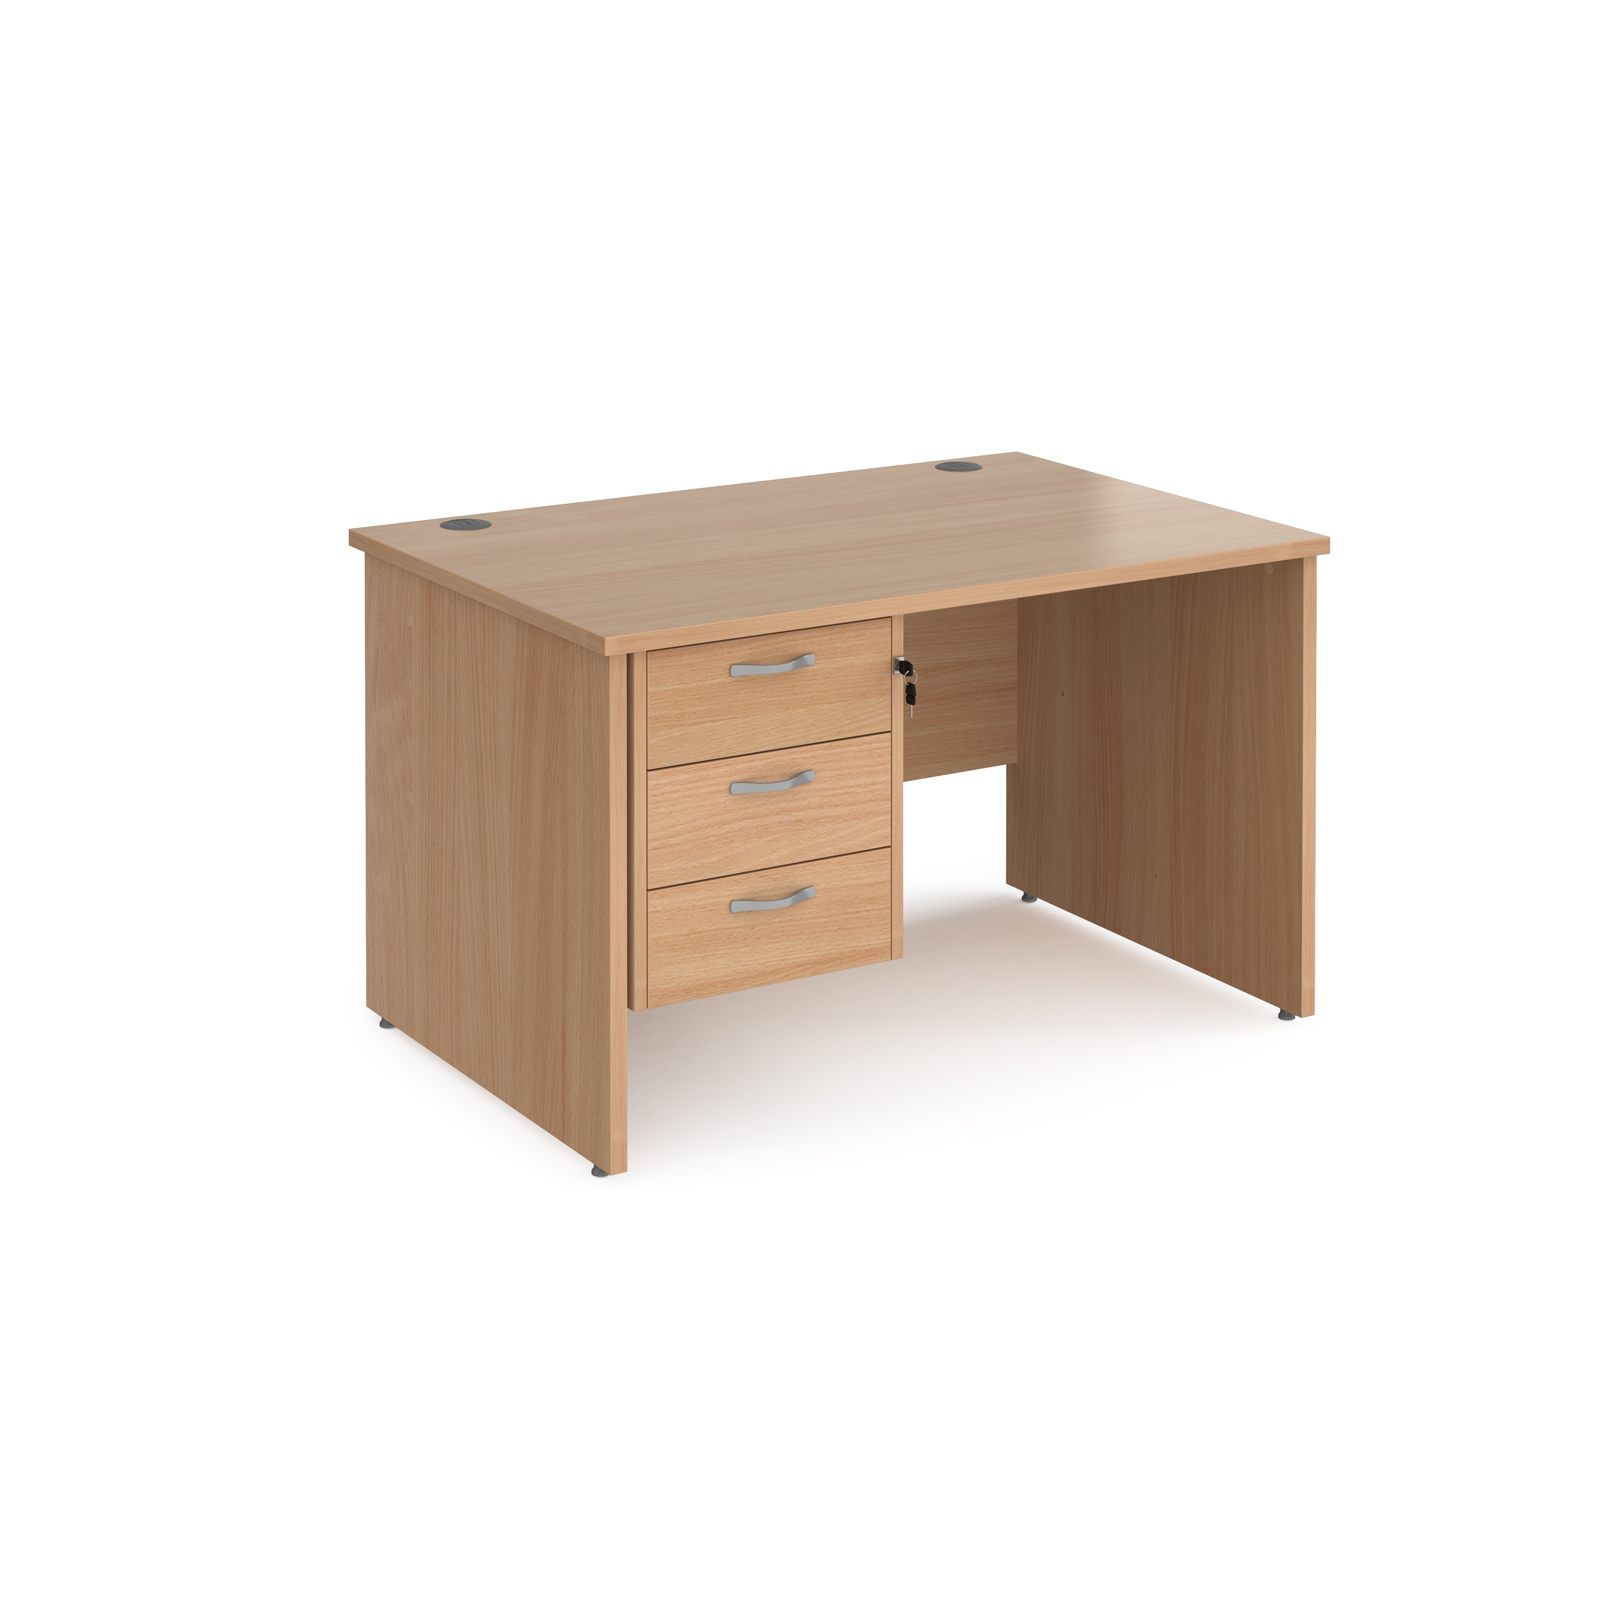 Maestro 25 straight desk 1200mm x 800mm with 3 drawer pedestal - beech top with panel end leg